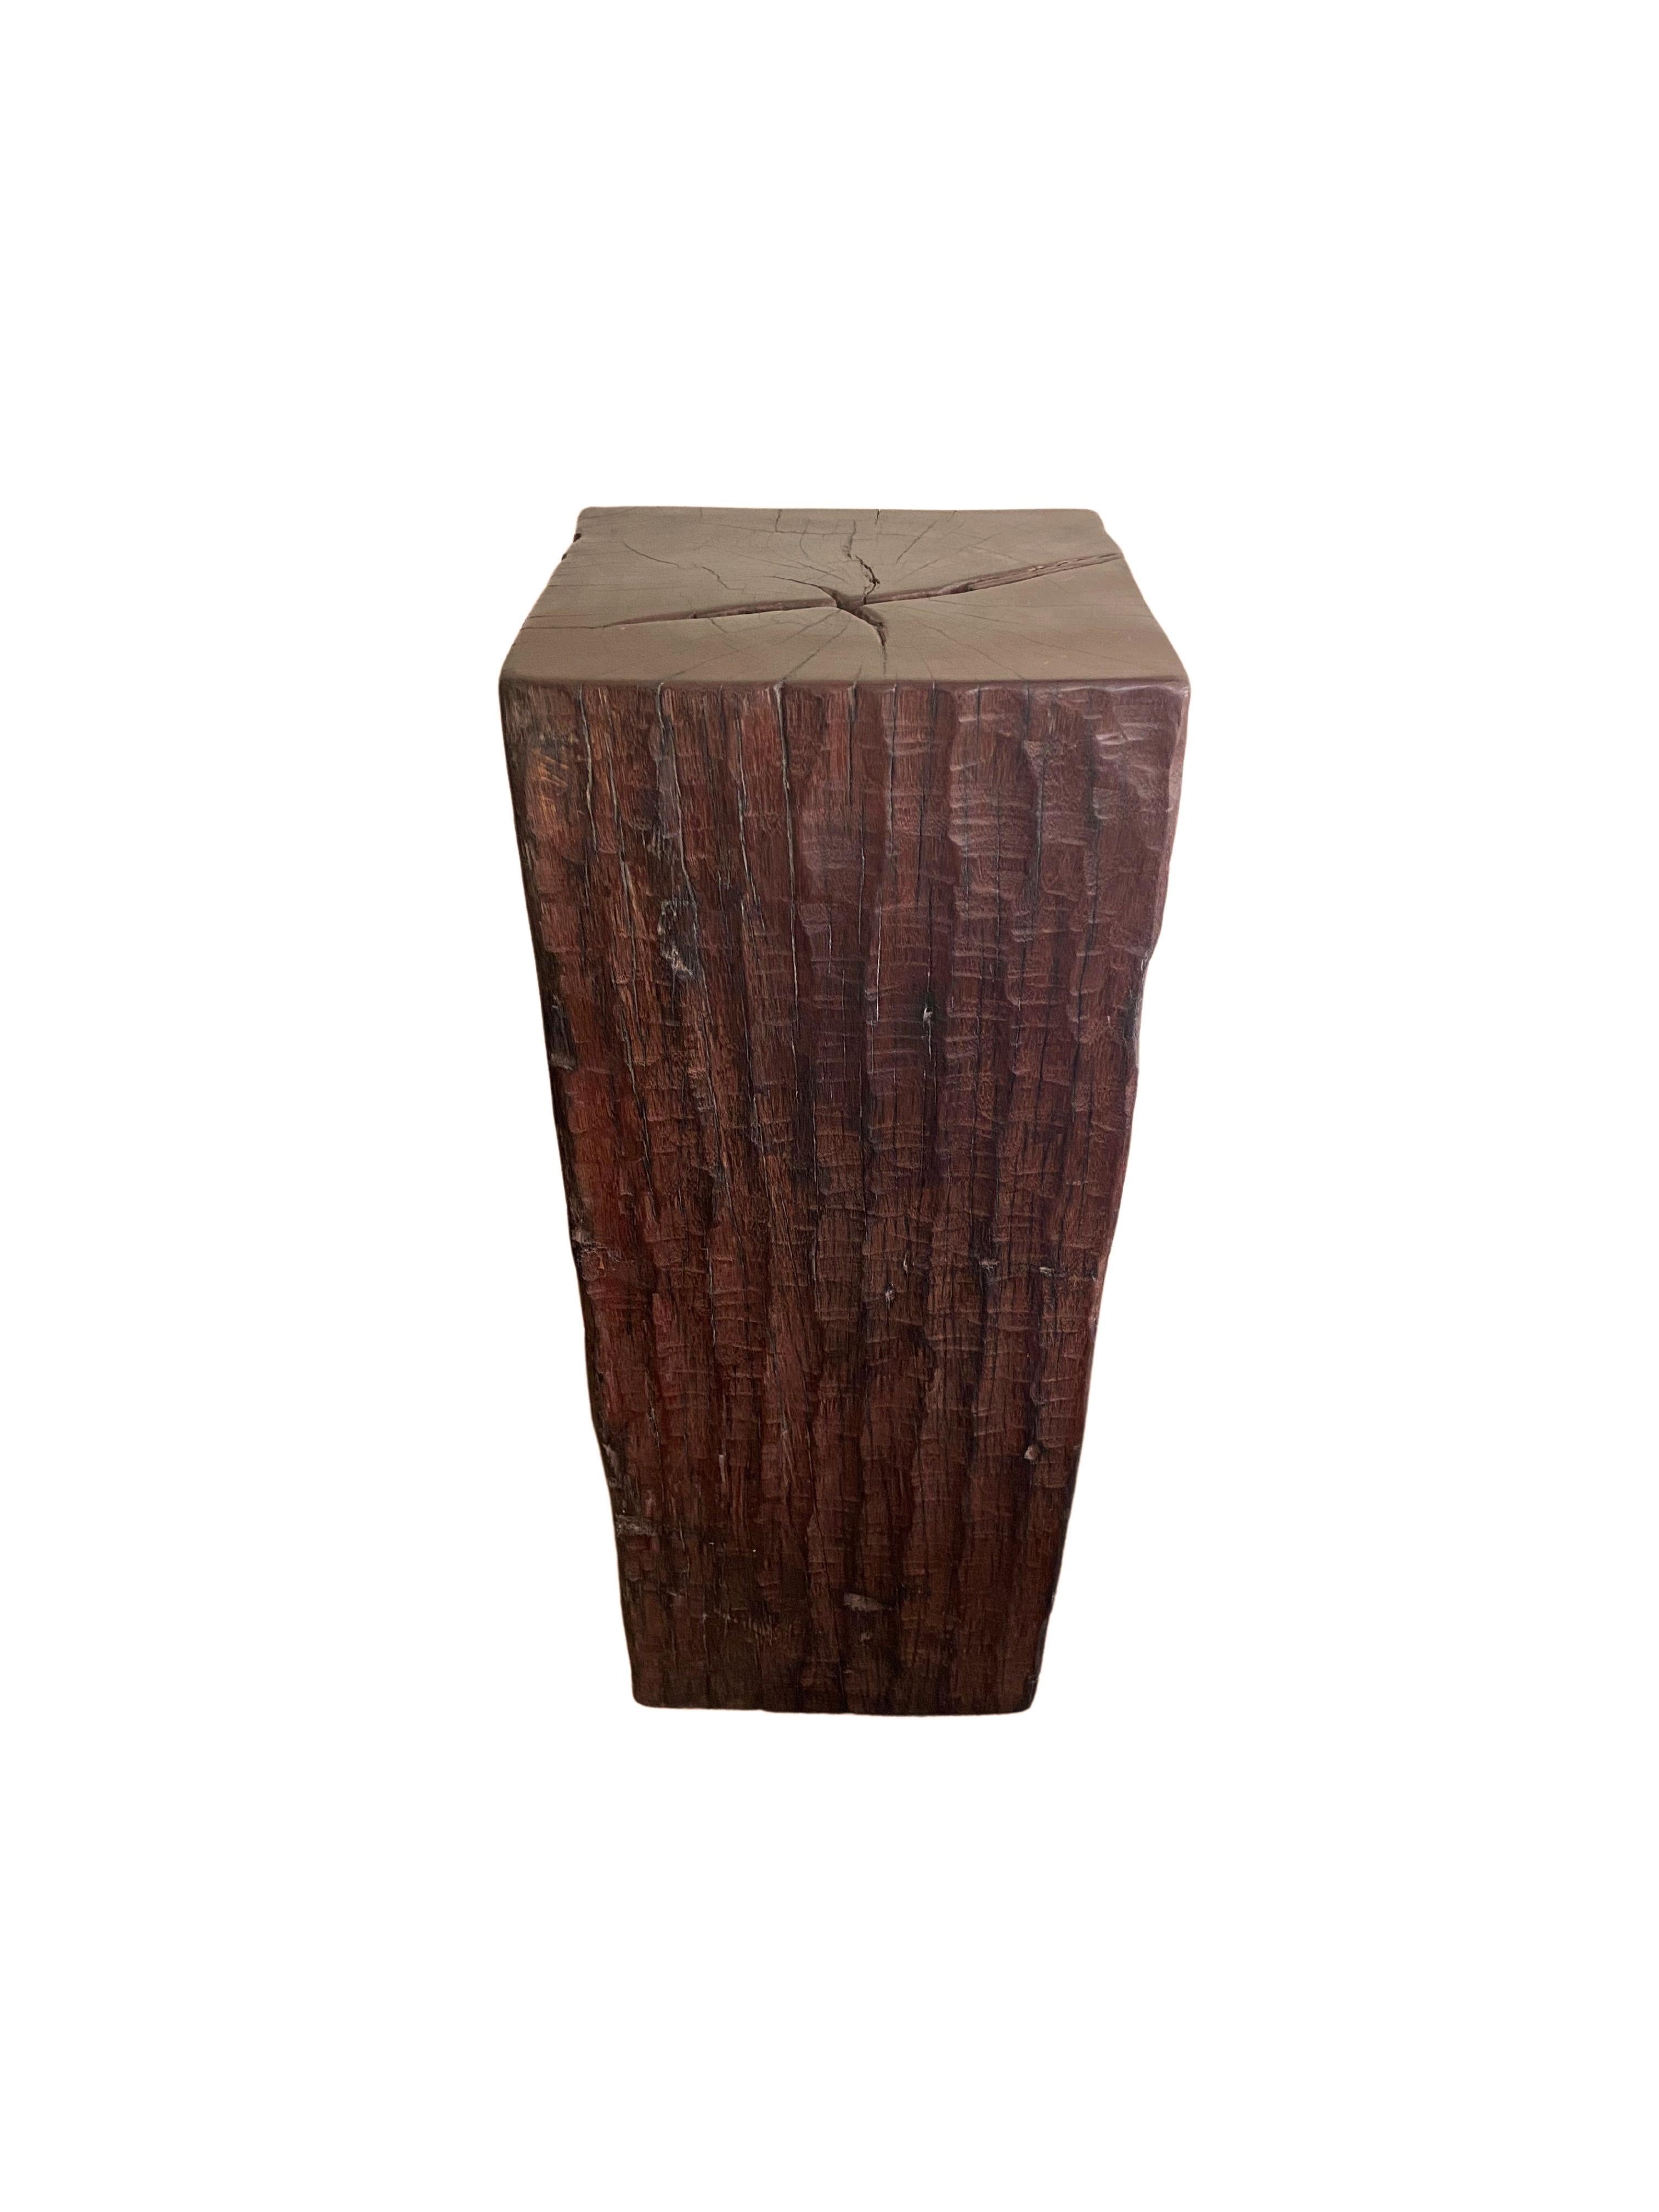 Solid Iron Wood Pedestal with Stunning Wood Texture For Sale 1